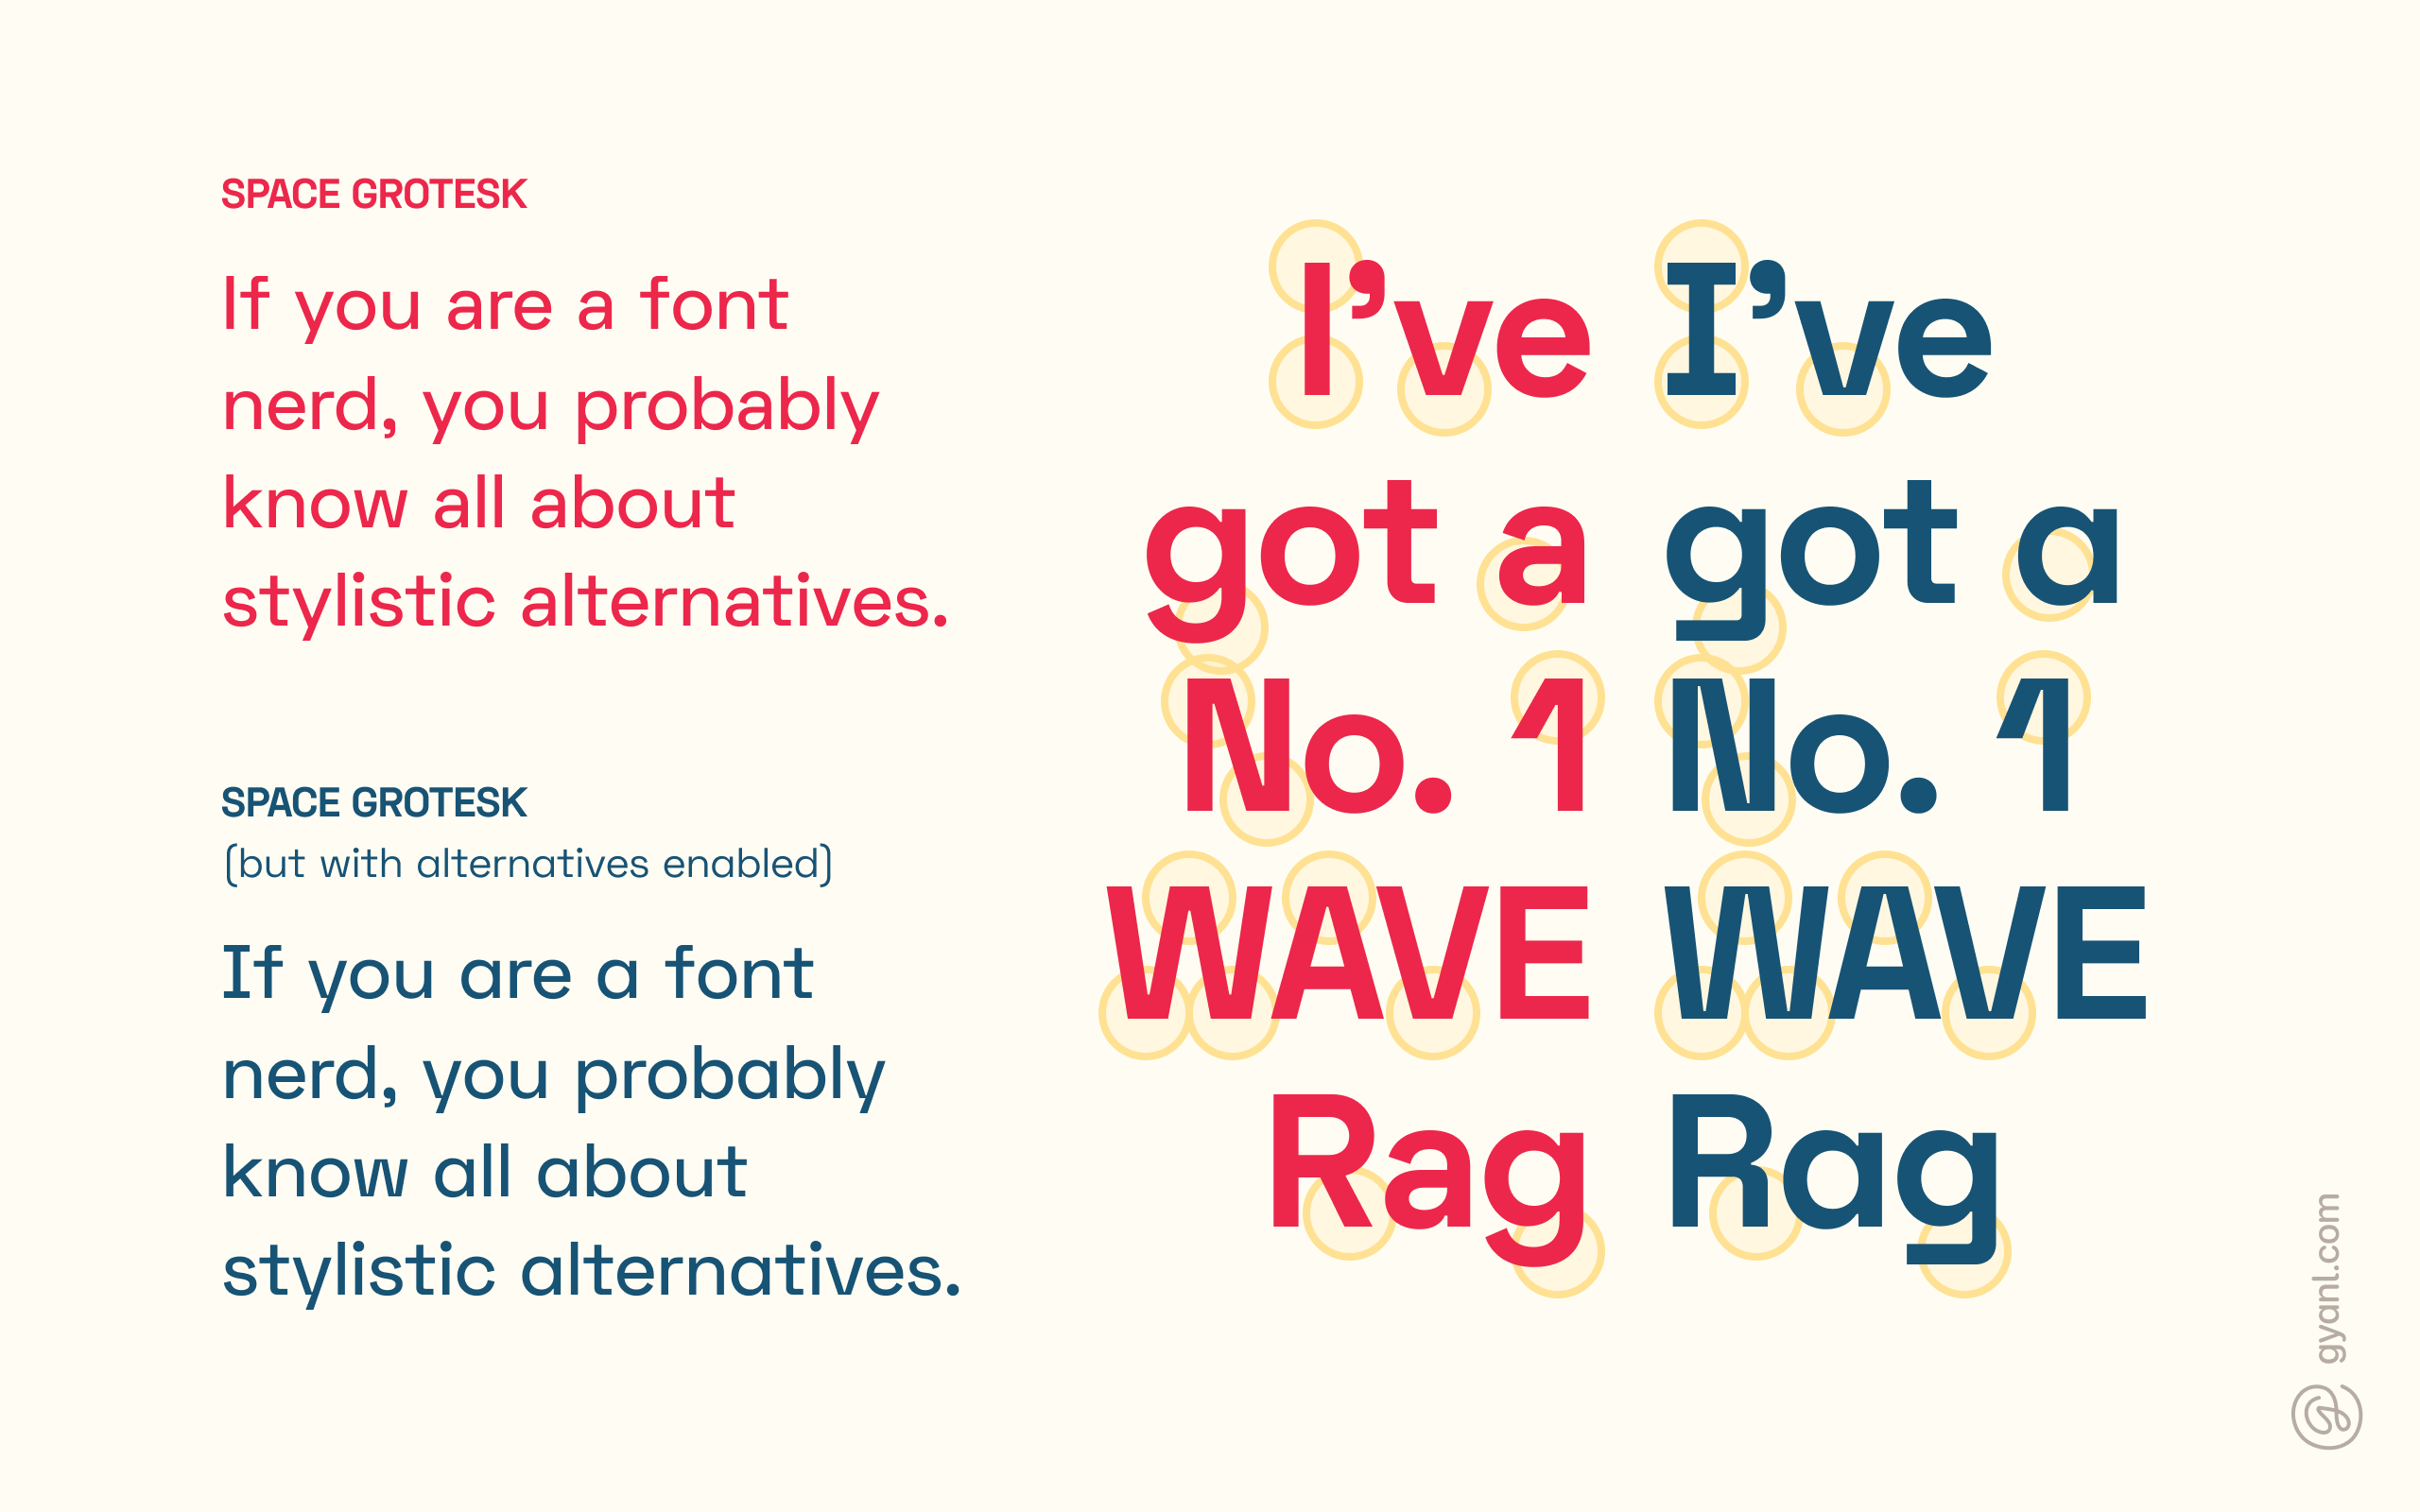 A font with and without stylistic alternatives enabled.